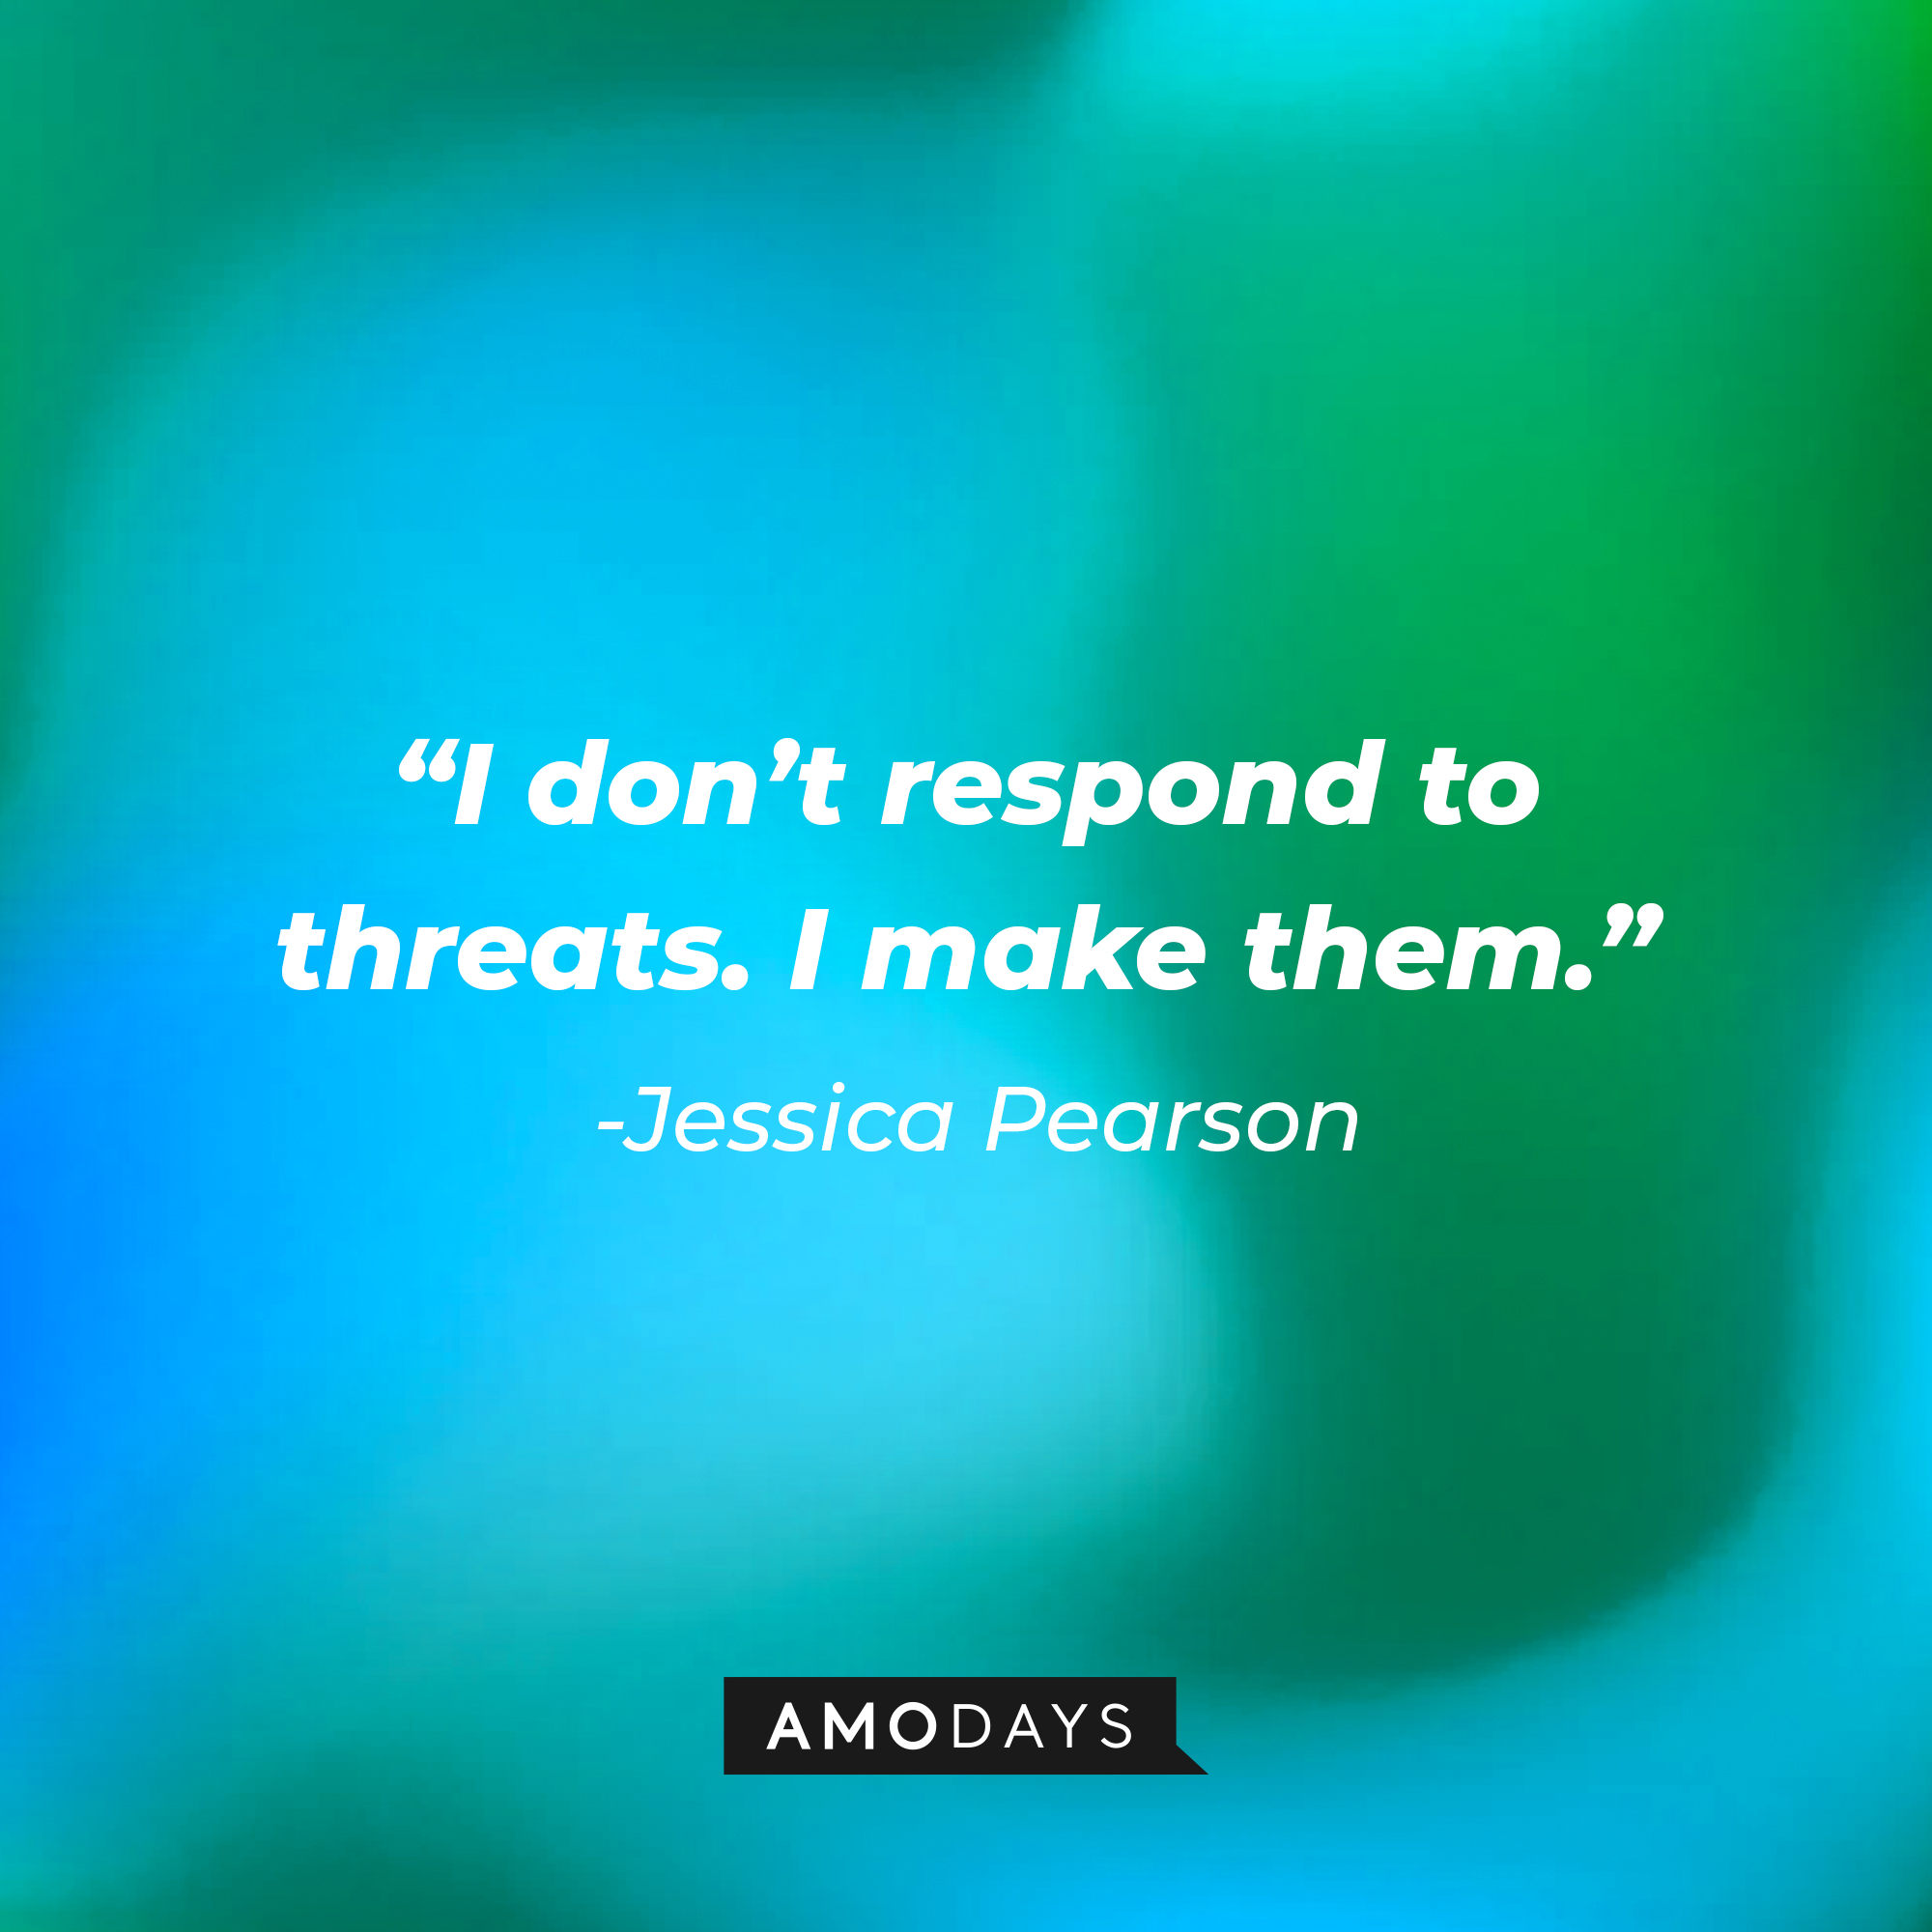 Jessica Pearson's quote from "Suits" : "I don't respond to threats. I make them." | Source: Amodays